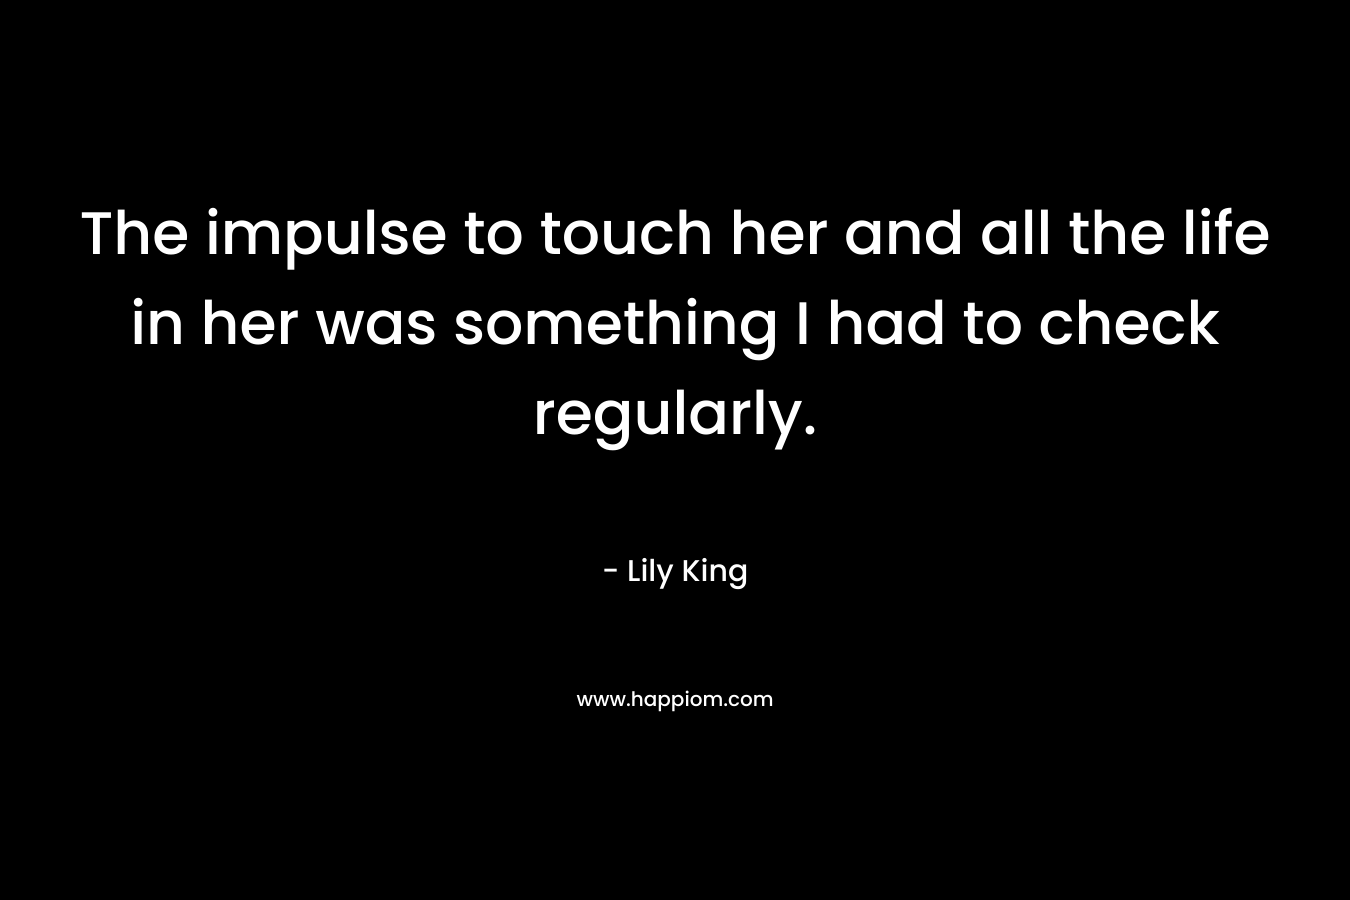 The impulse to touch her and all the life in her was something I had to check regularly. – Lily King